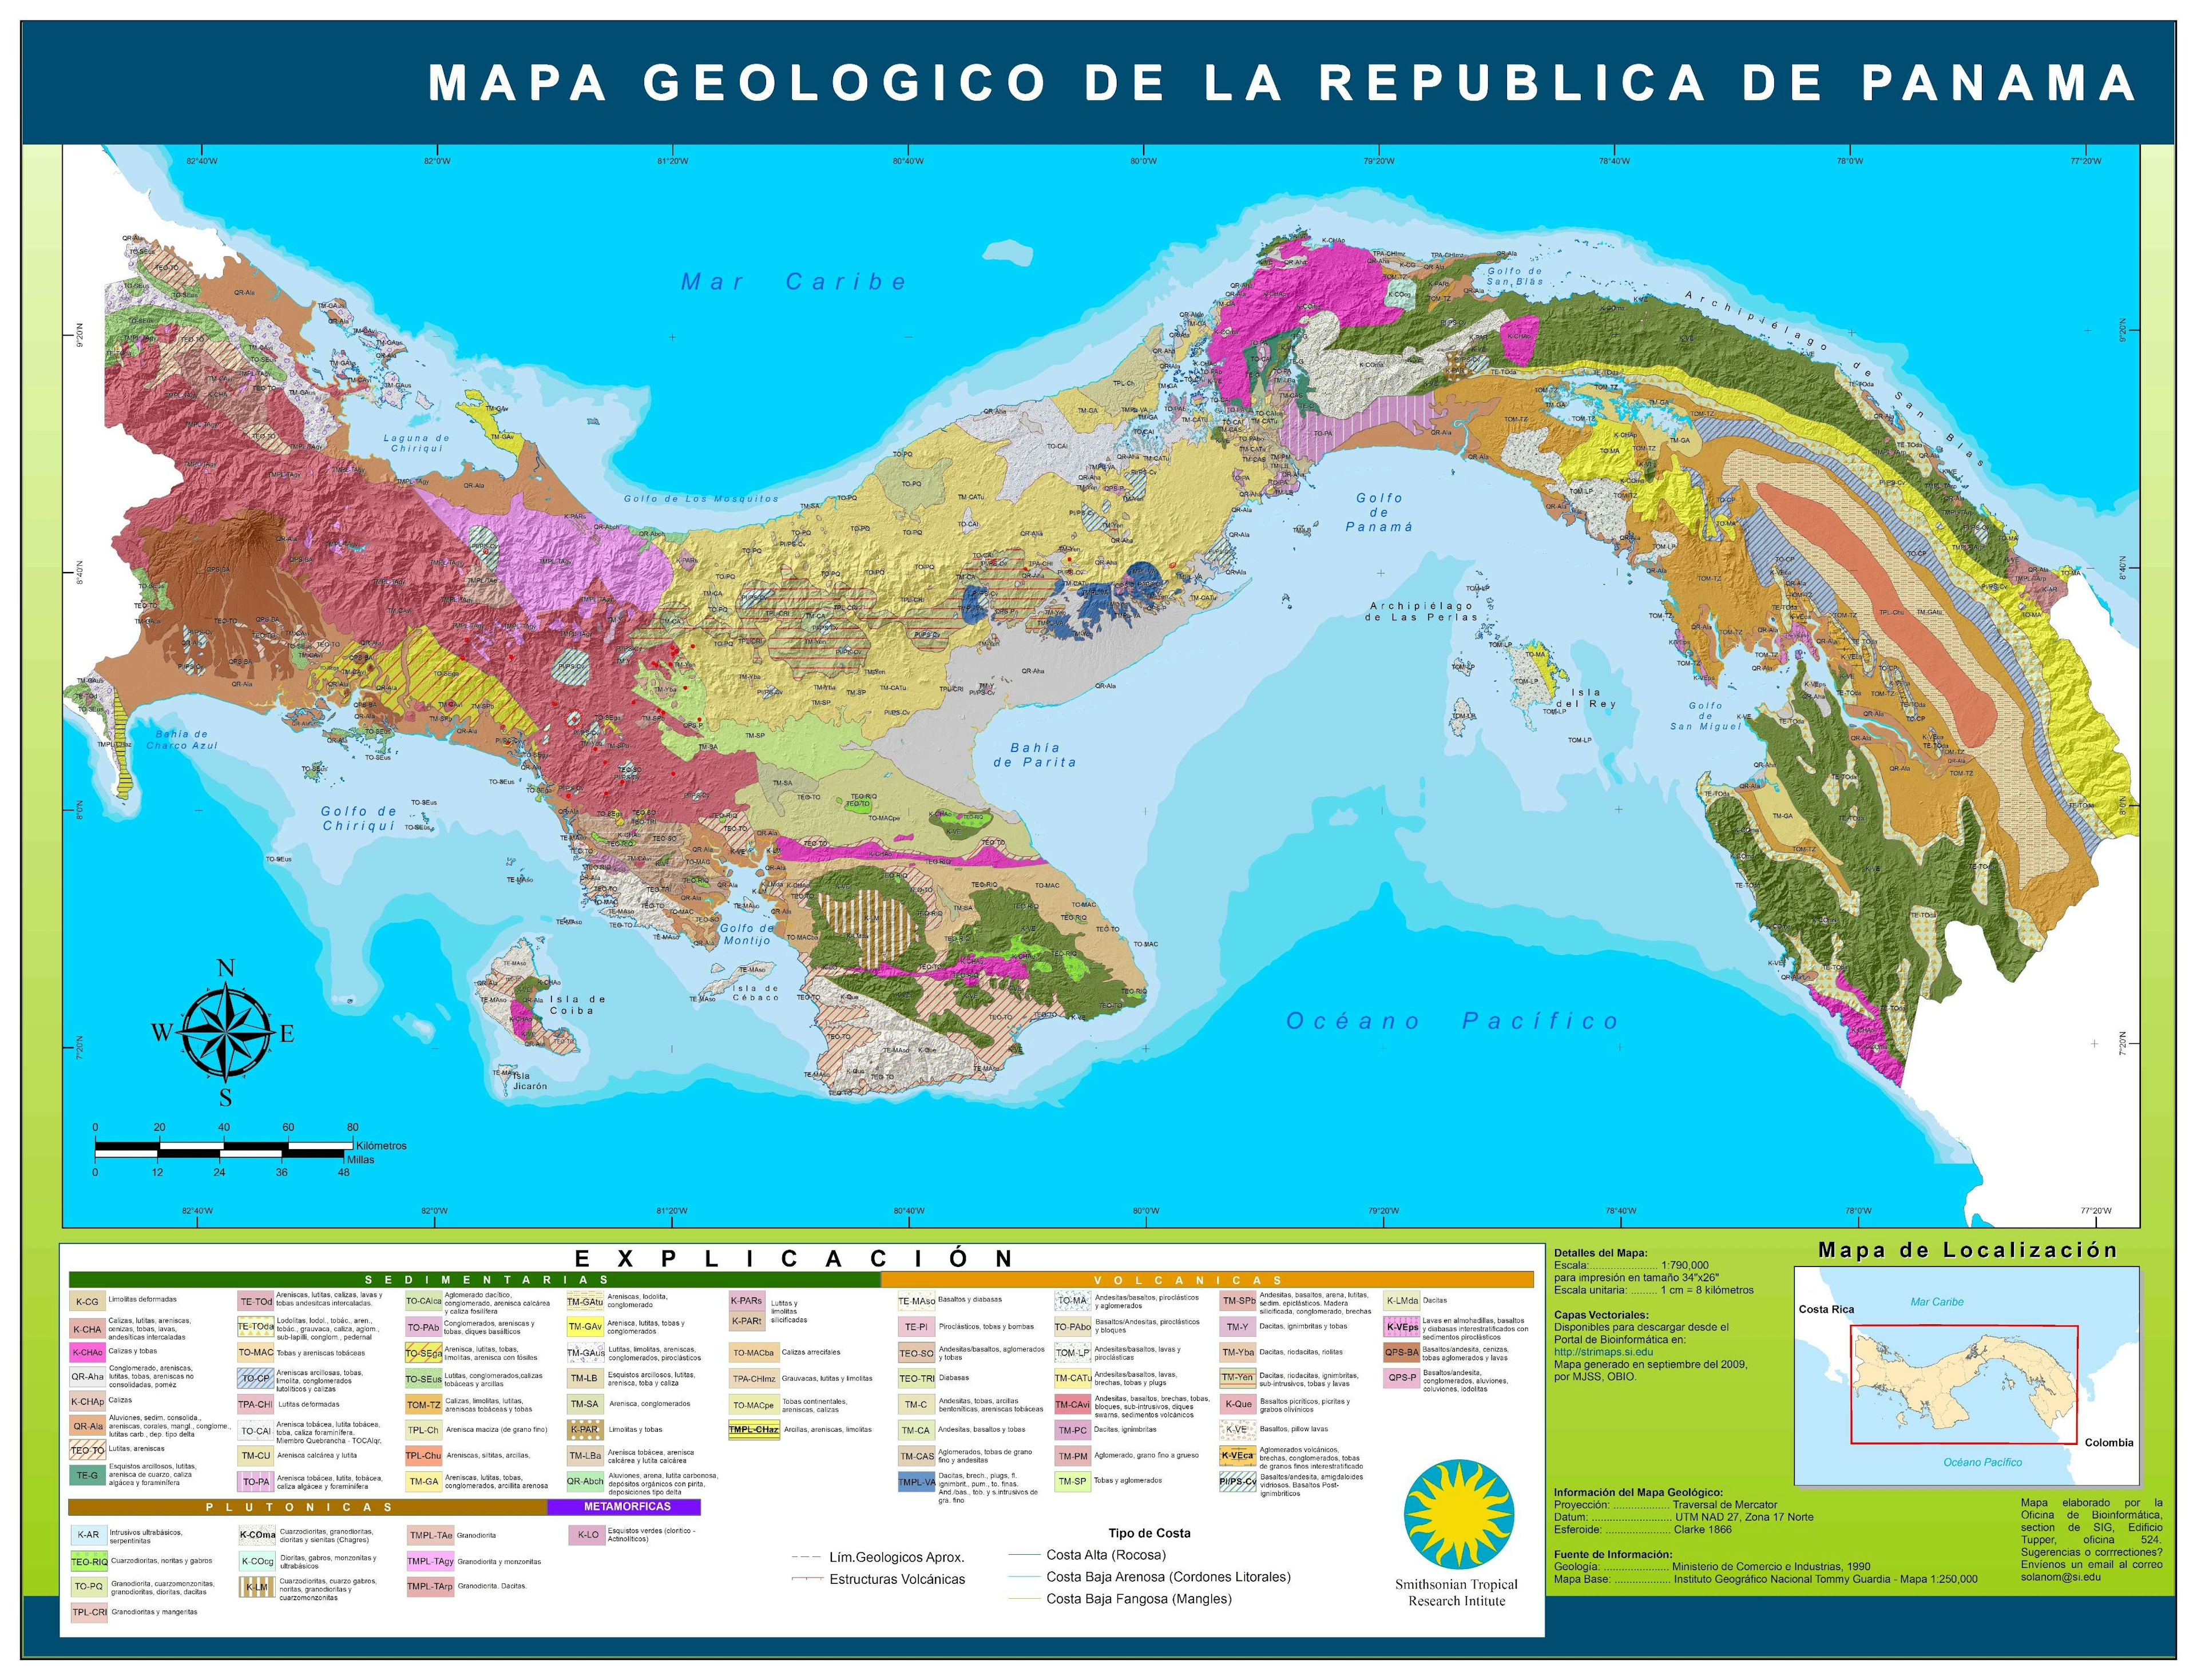 Geologic Map for the Republic of Panama